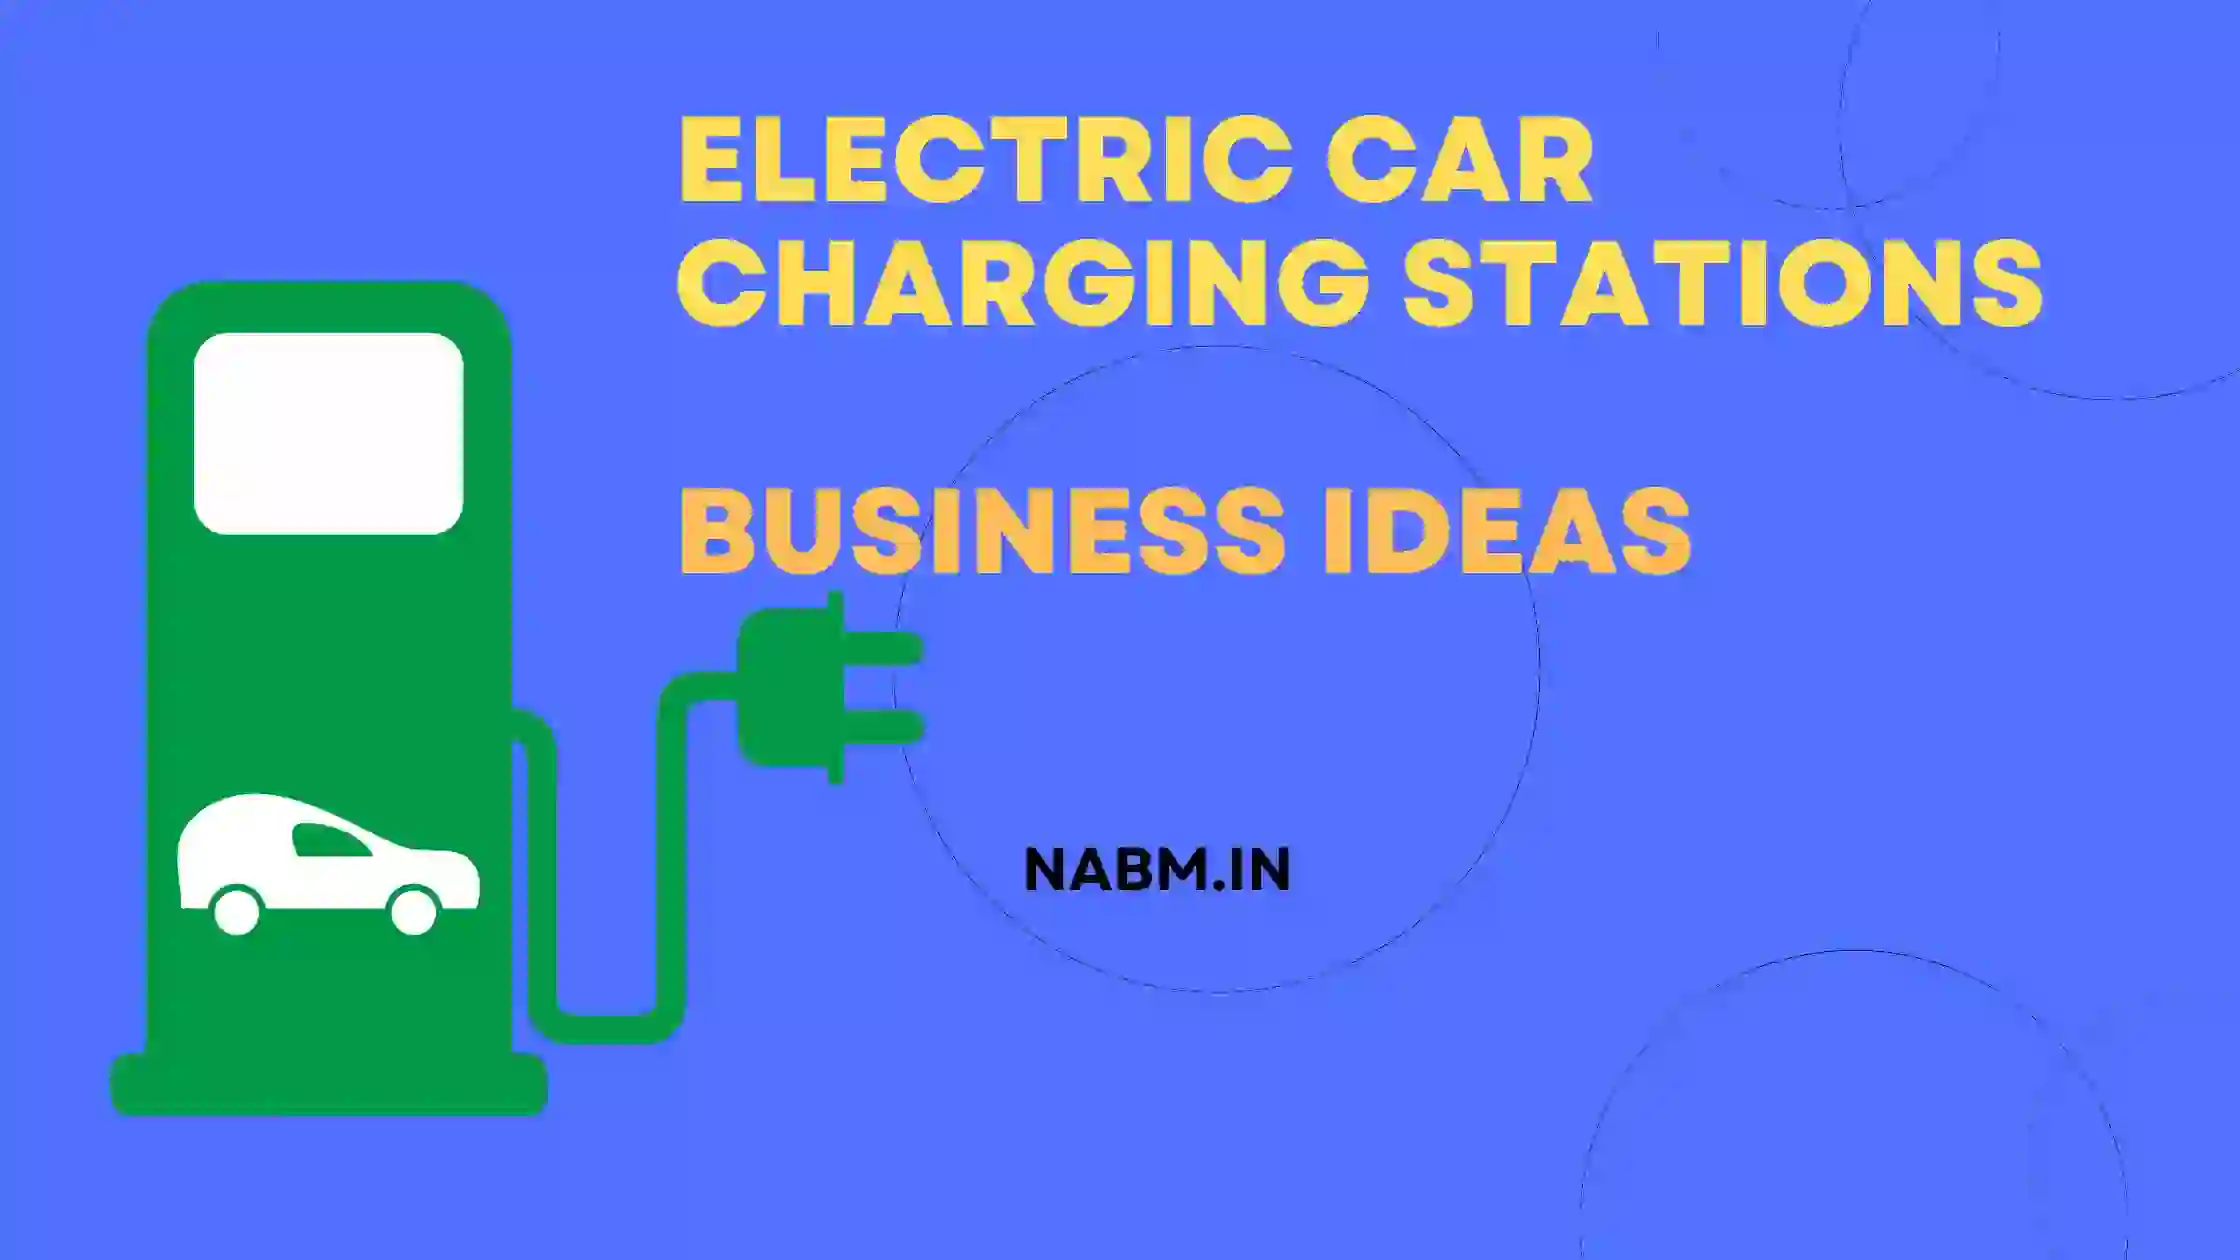 ELECTRIC CAR BUSINESS IDEAS | Are Electric Car Charging Stations A Good Business Opportunity?